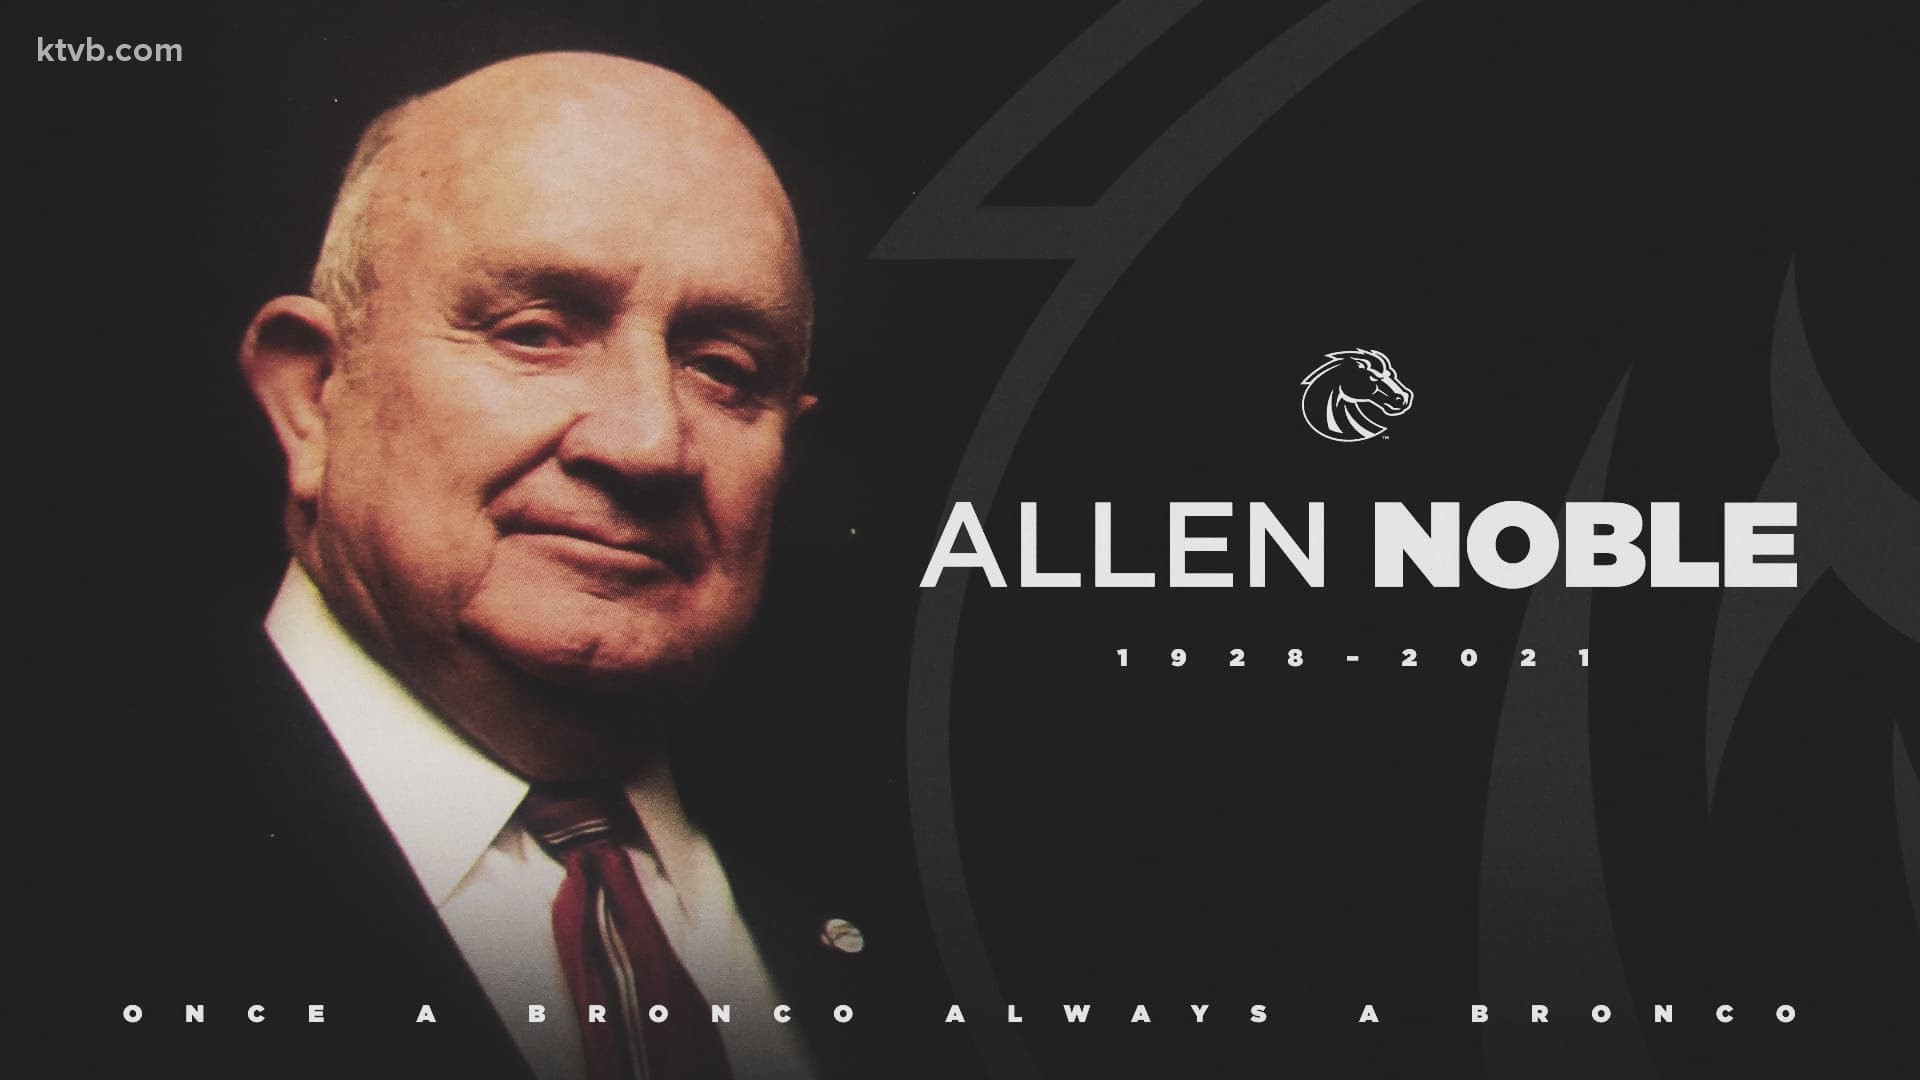 The man behind Boise State's Allen Noble Hall of Fame passed away on Tuesday, according to the university.